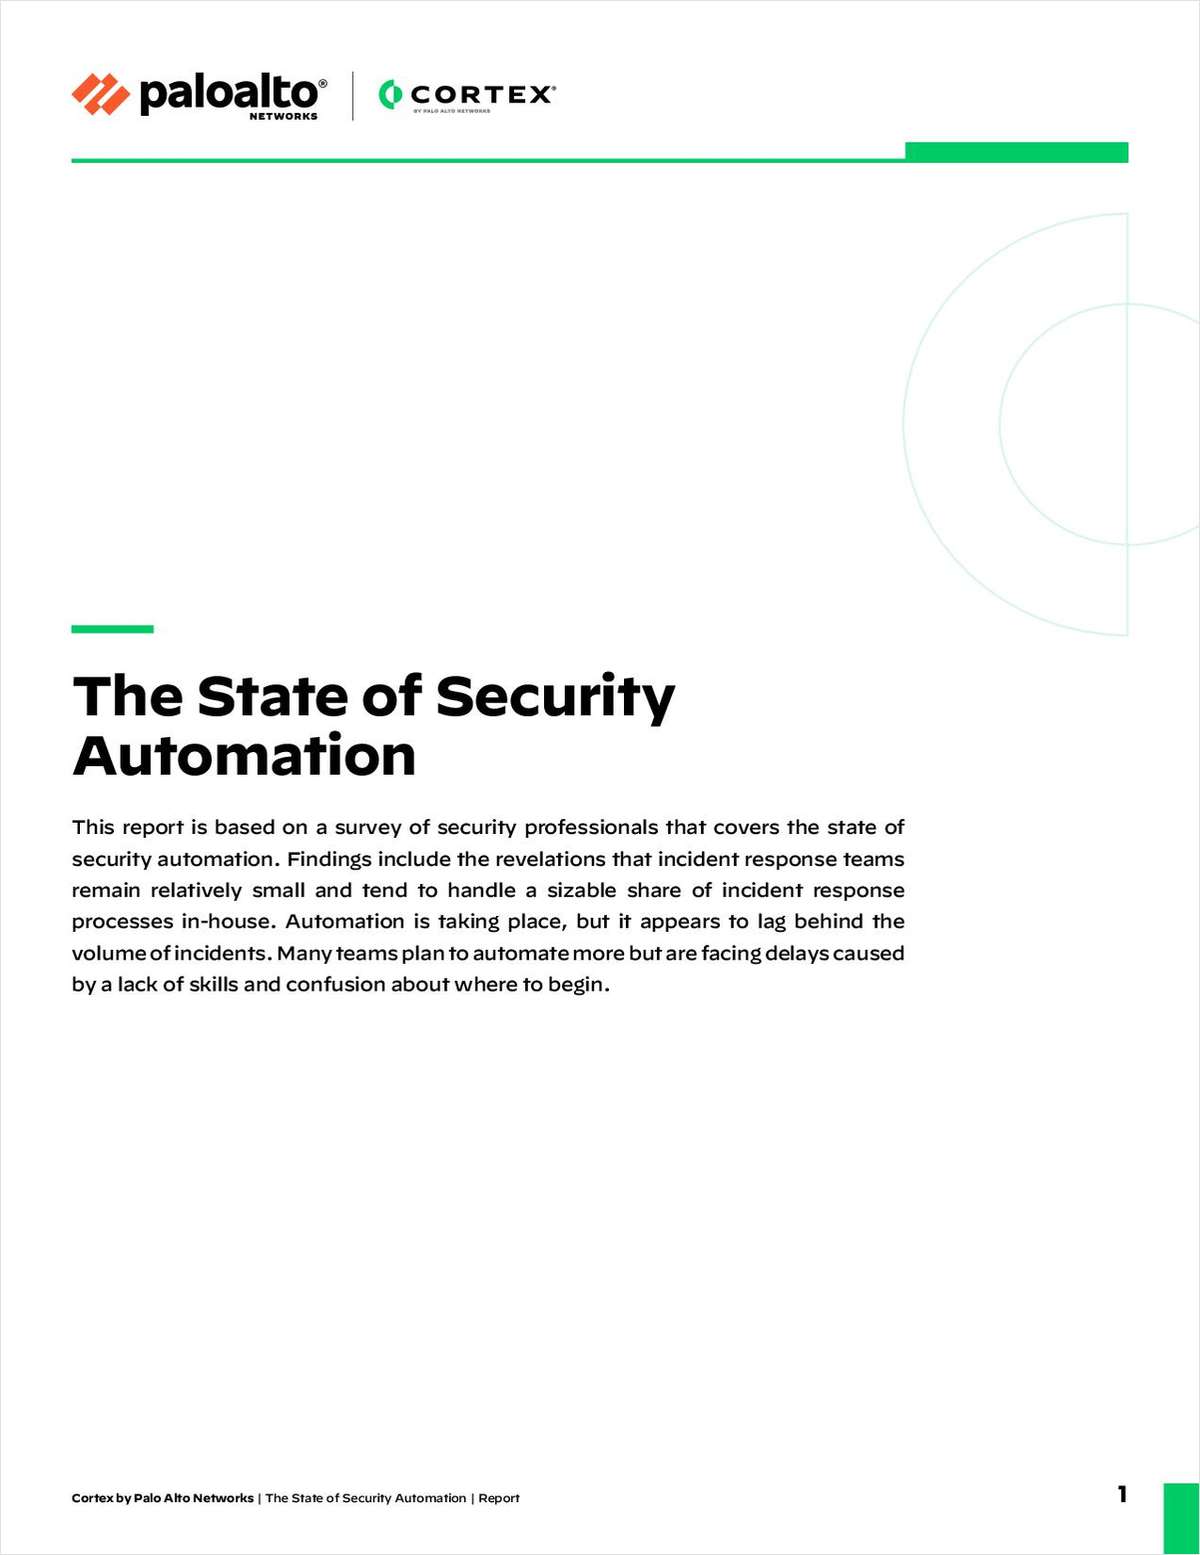 The State of Security Automation Report